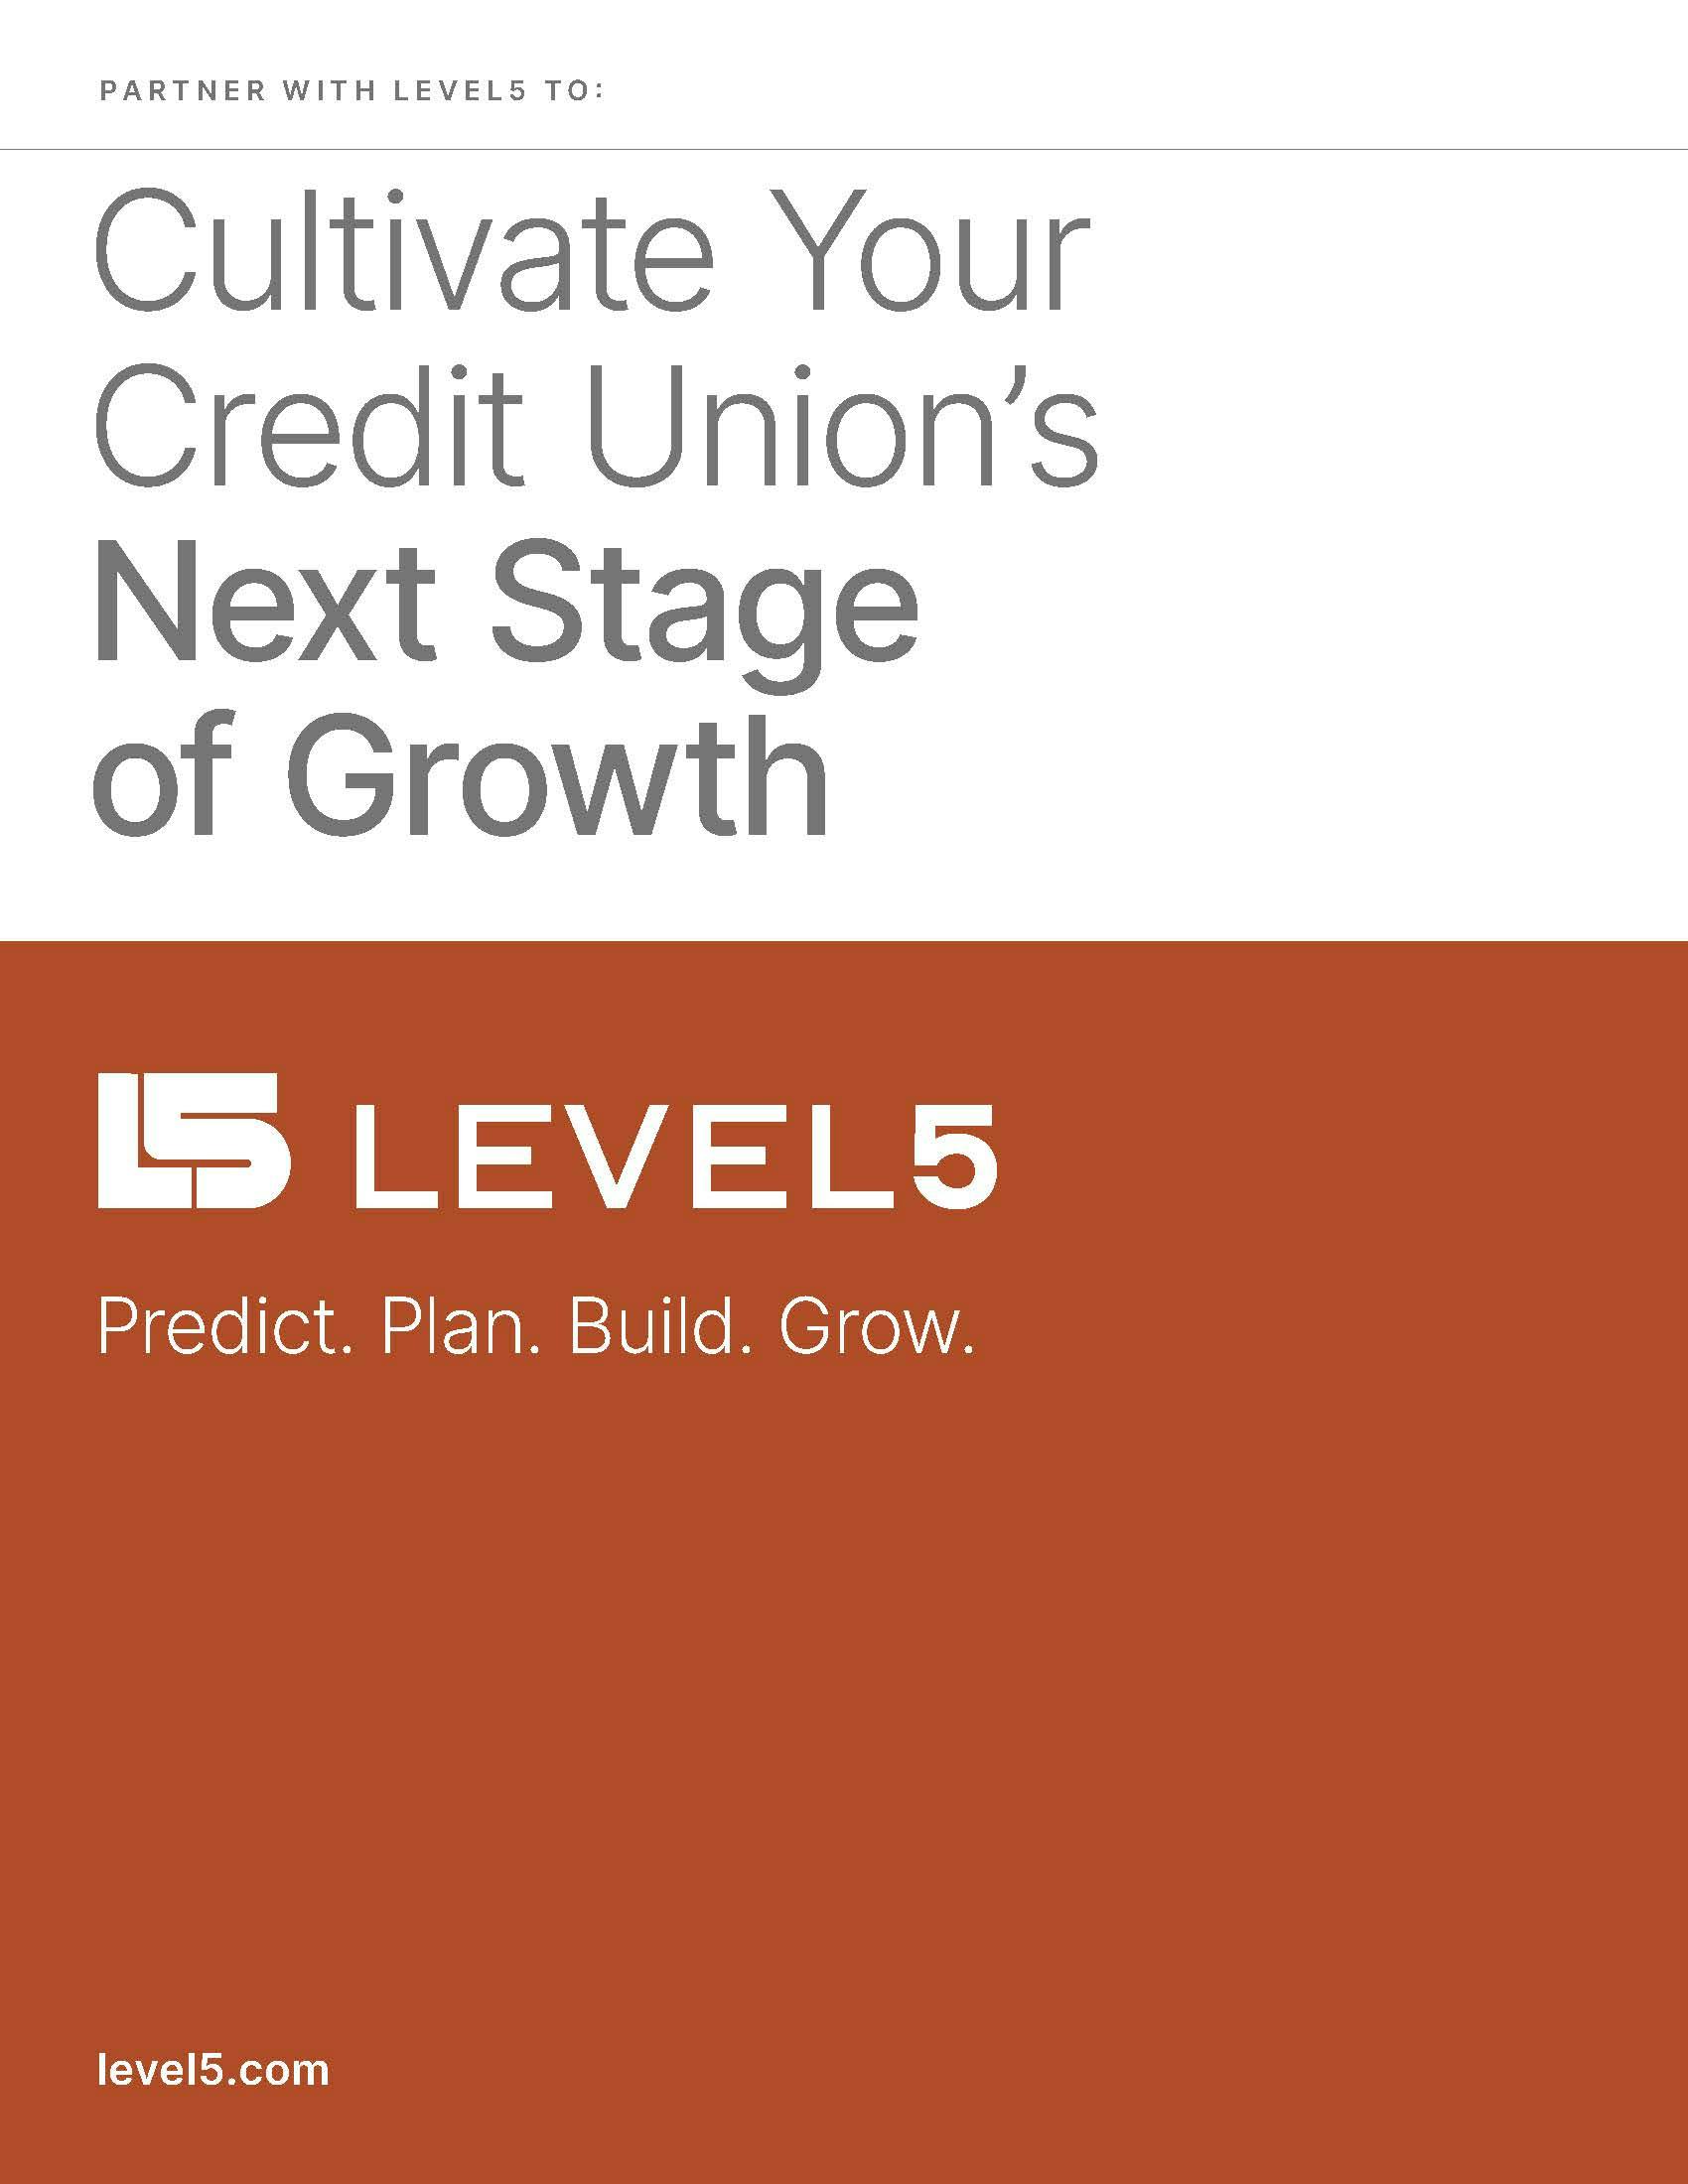 Title page for white paper: Cultivate Your Credit Union's Next Stage of Growth